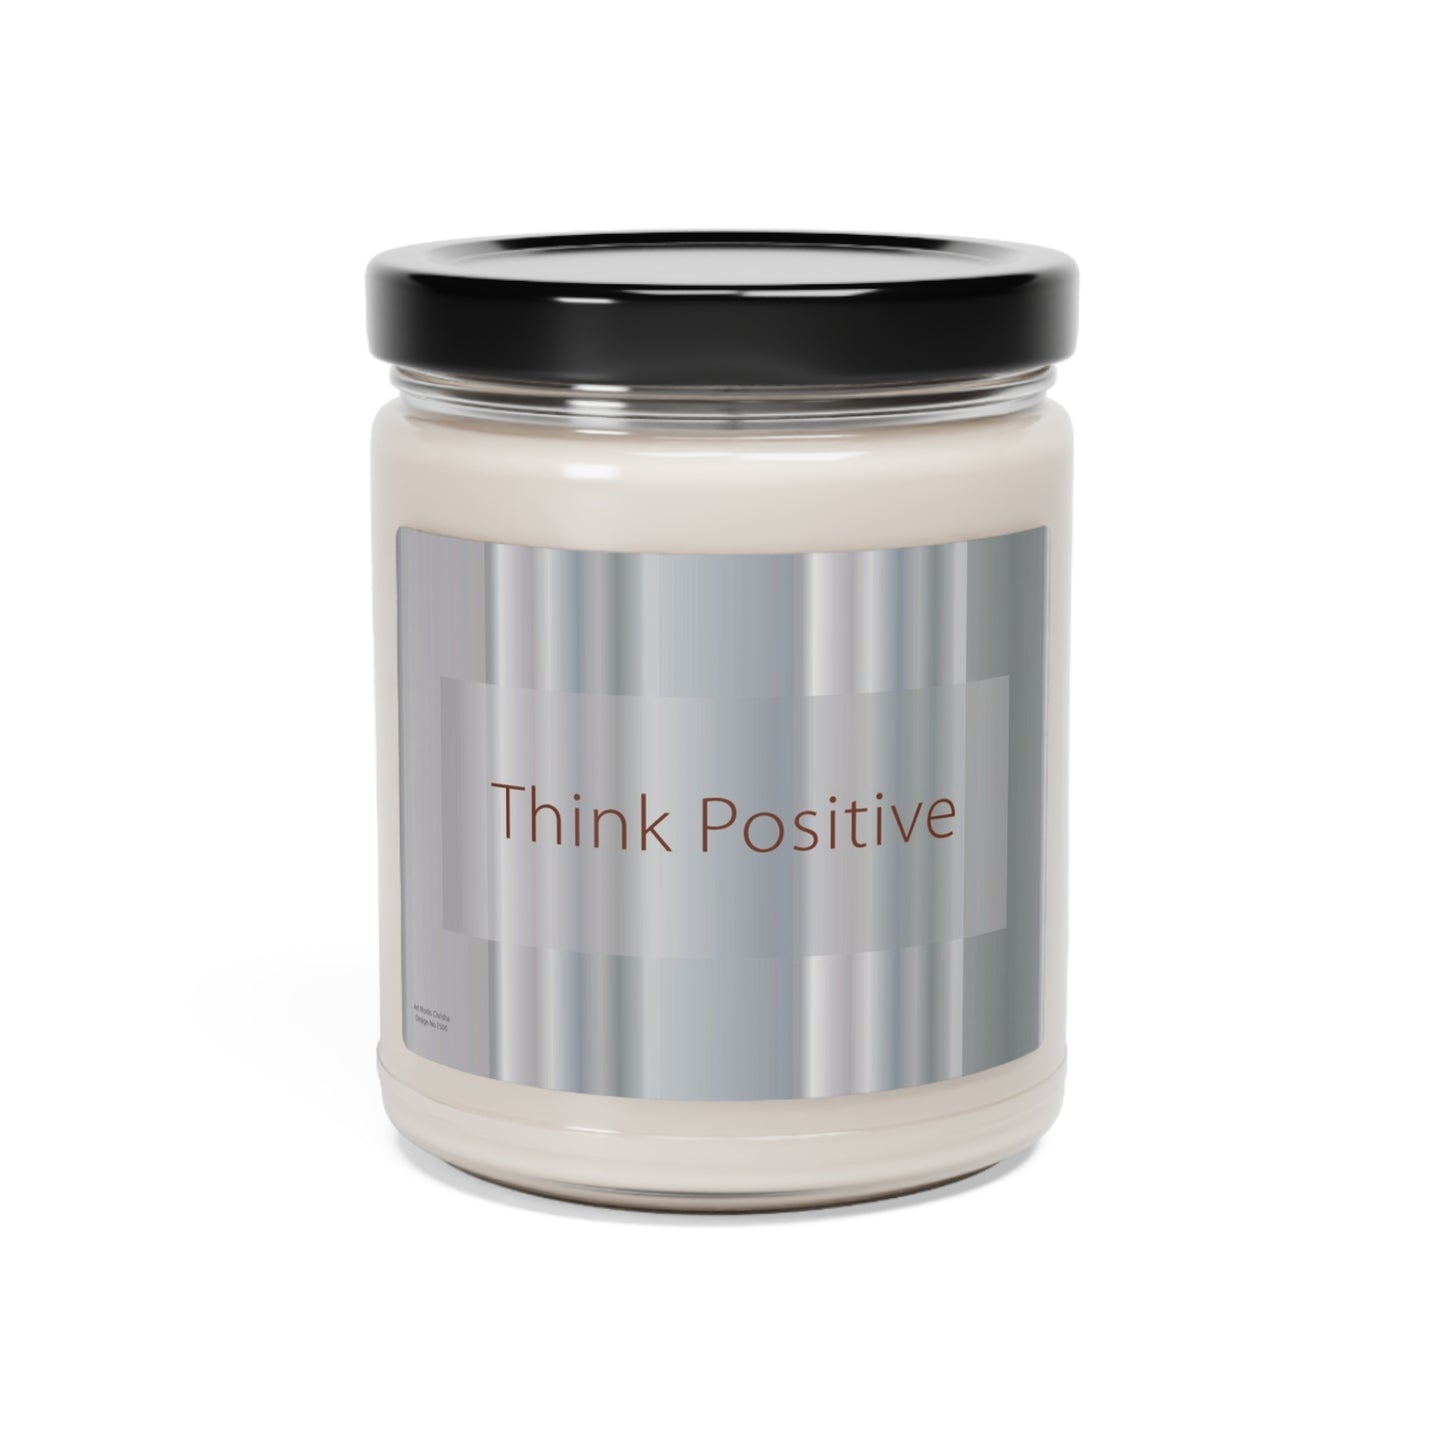 Scented Soy Candle, 9oz Think Positive - Design No.1500